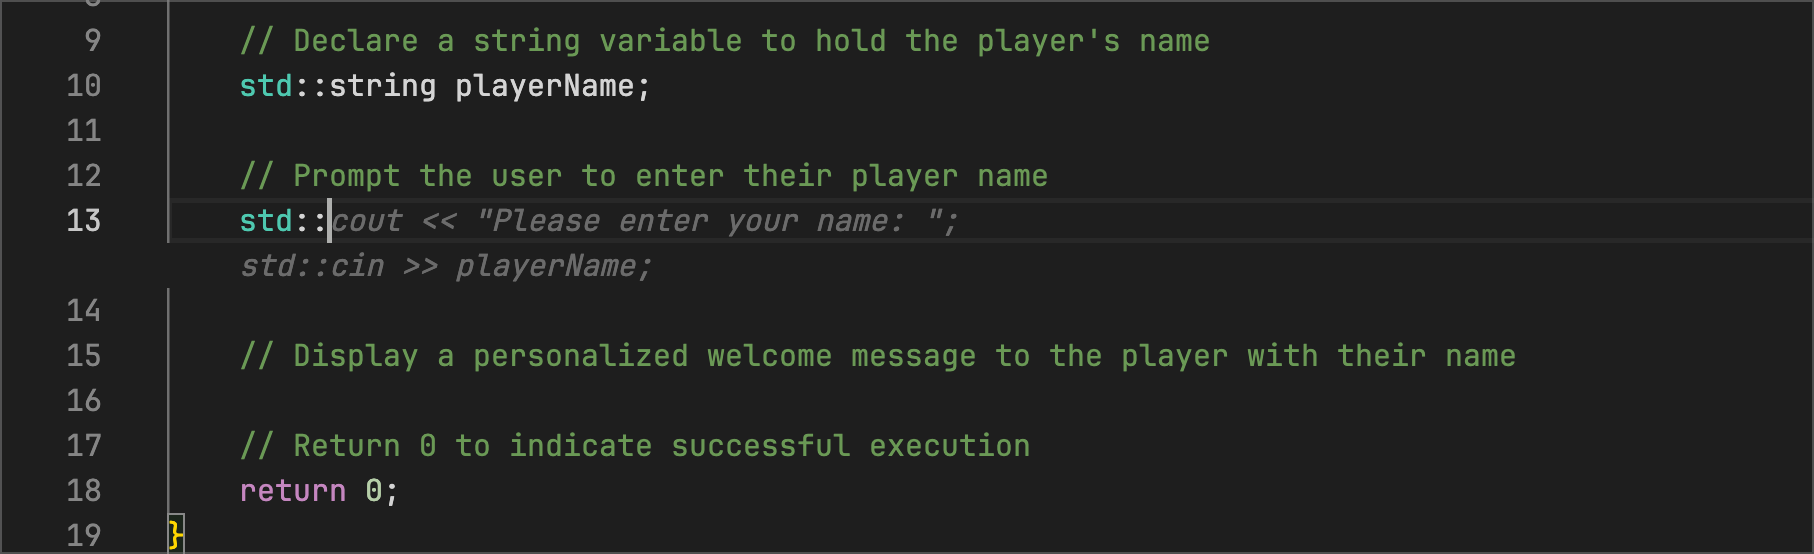 adventure.cpp - Code Suggestions prompts the user to input their player name